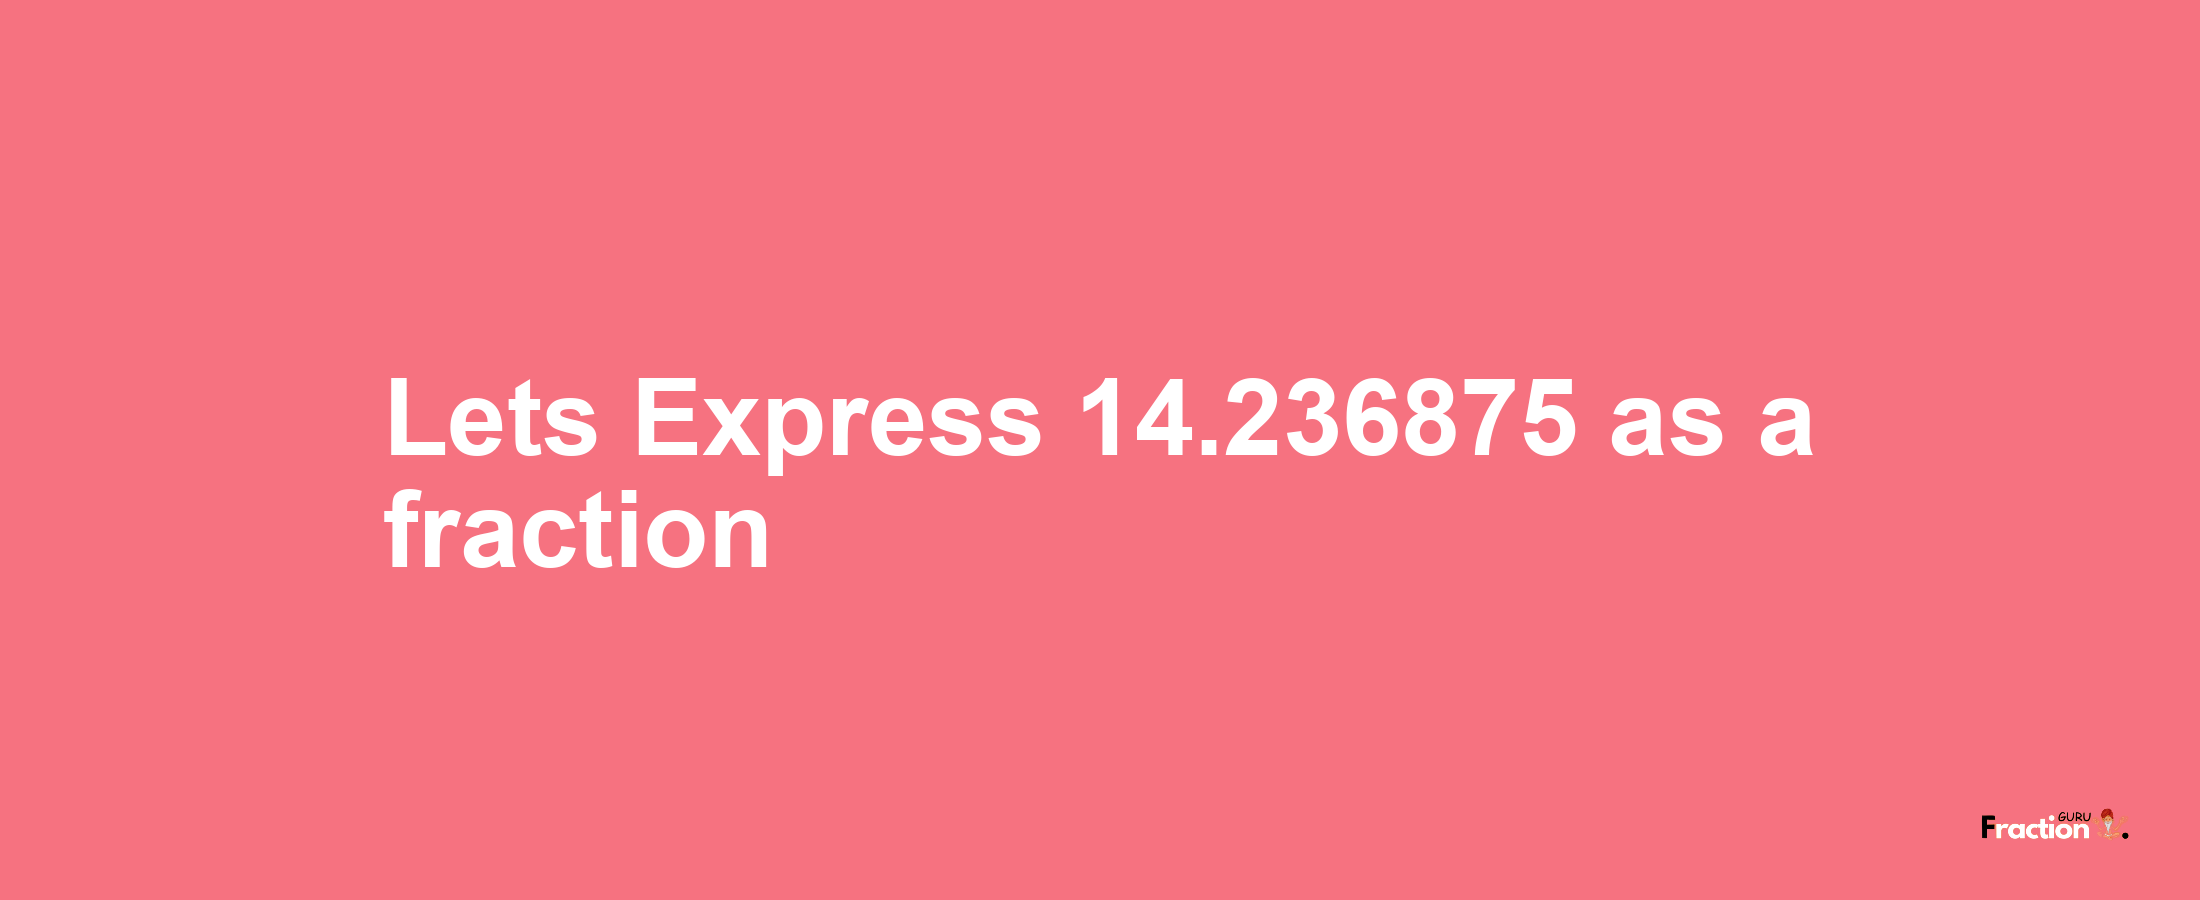 Lets Express 14.236875 as afraction